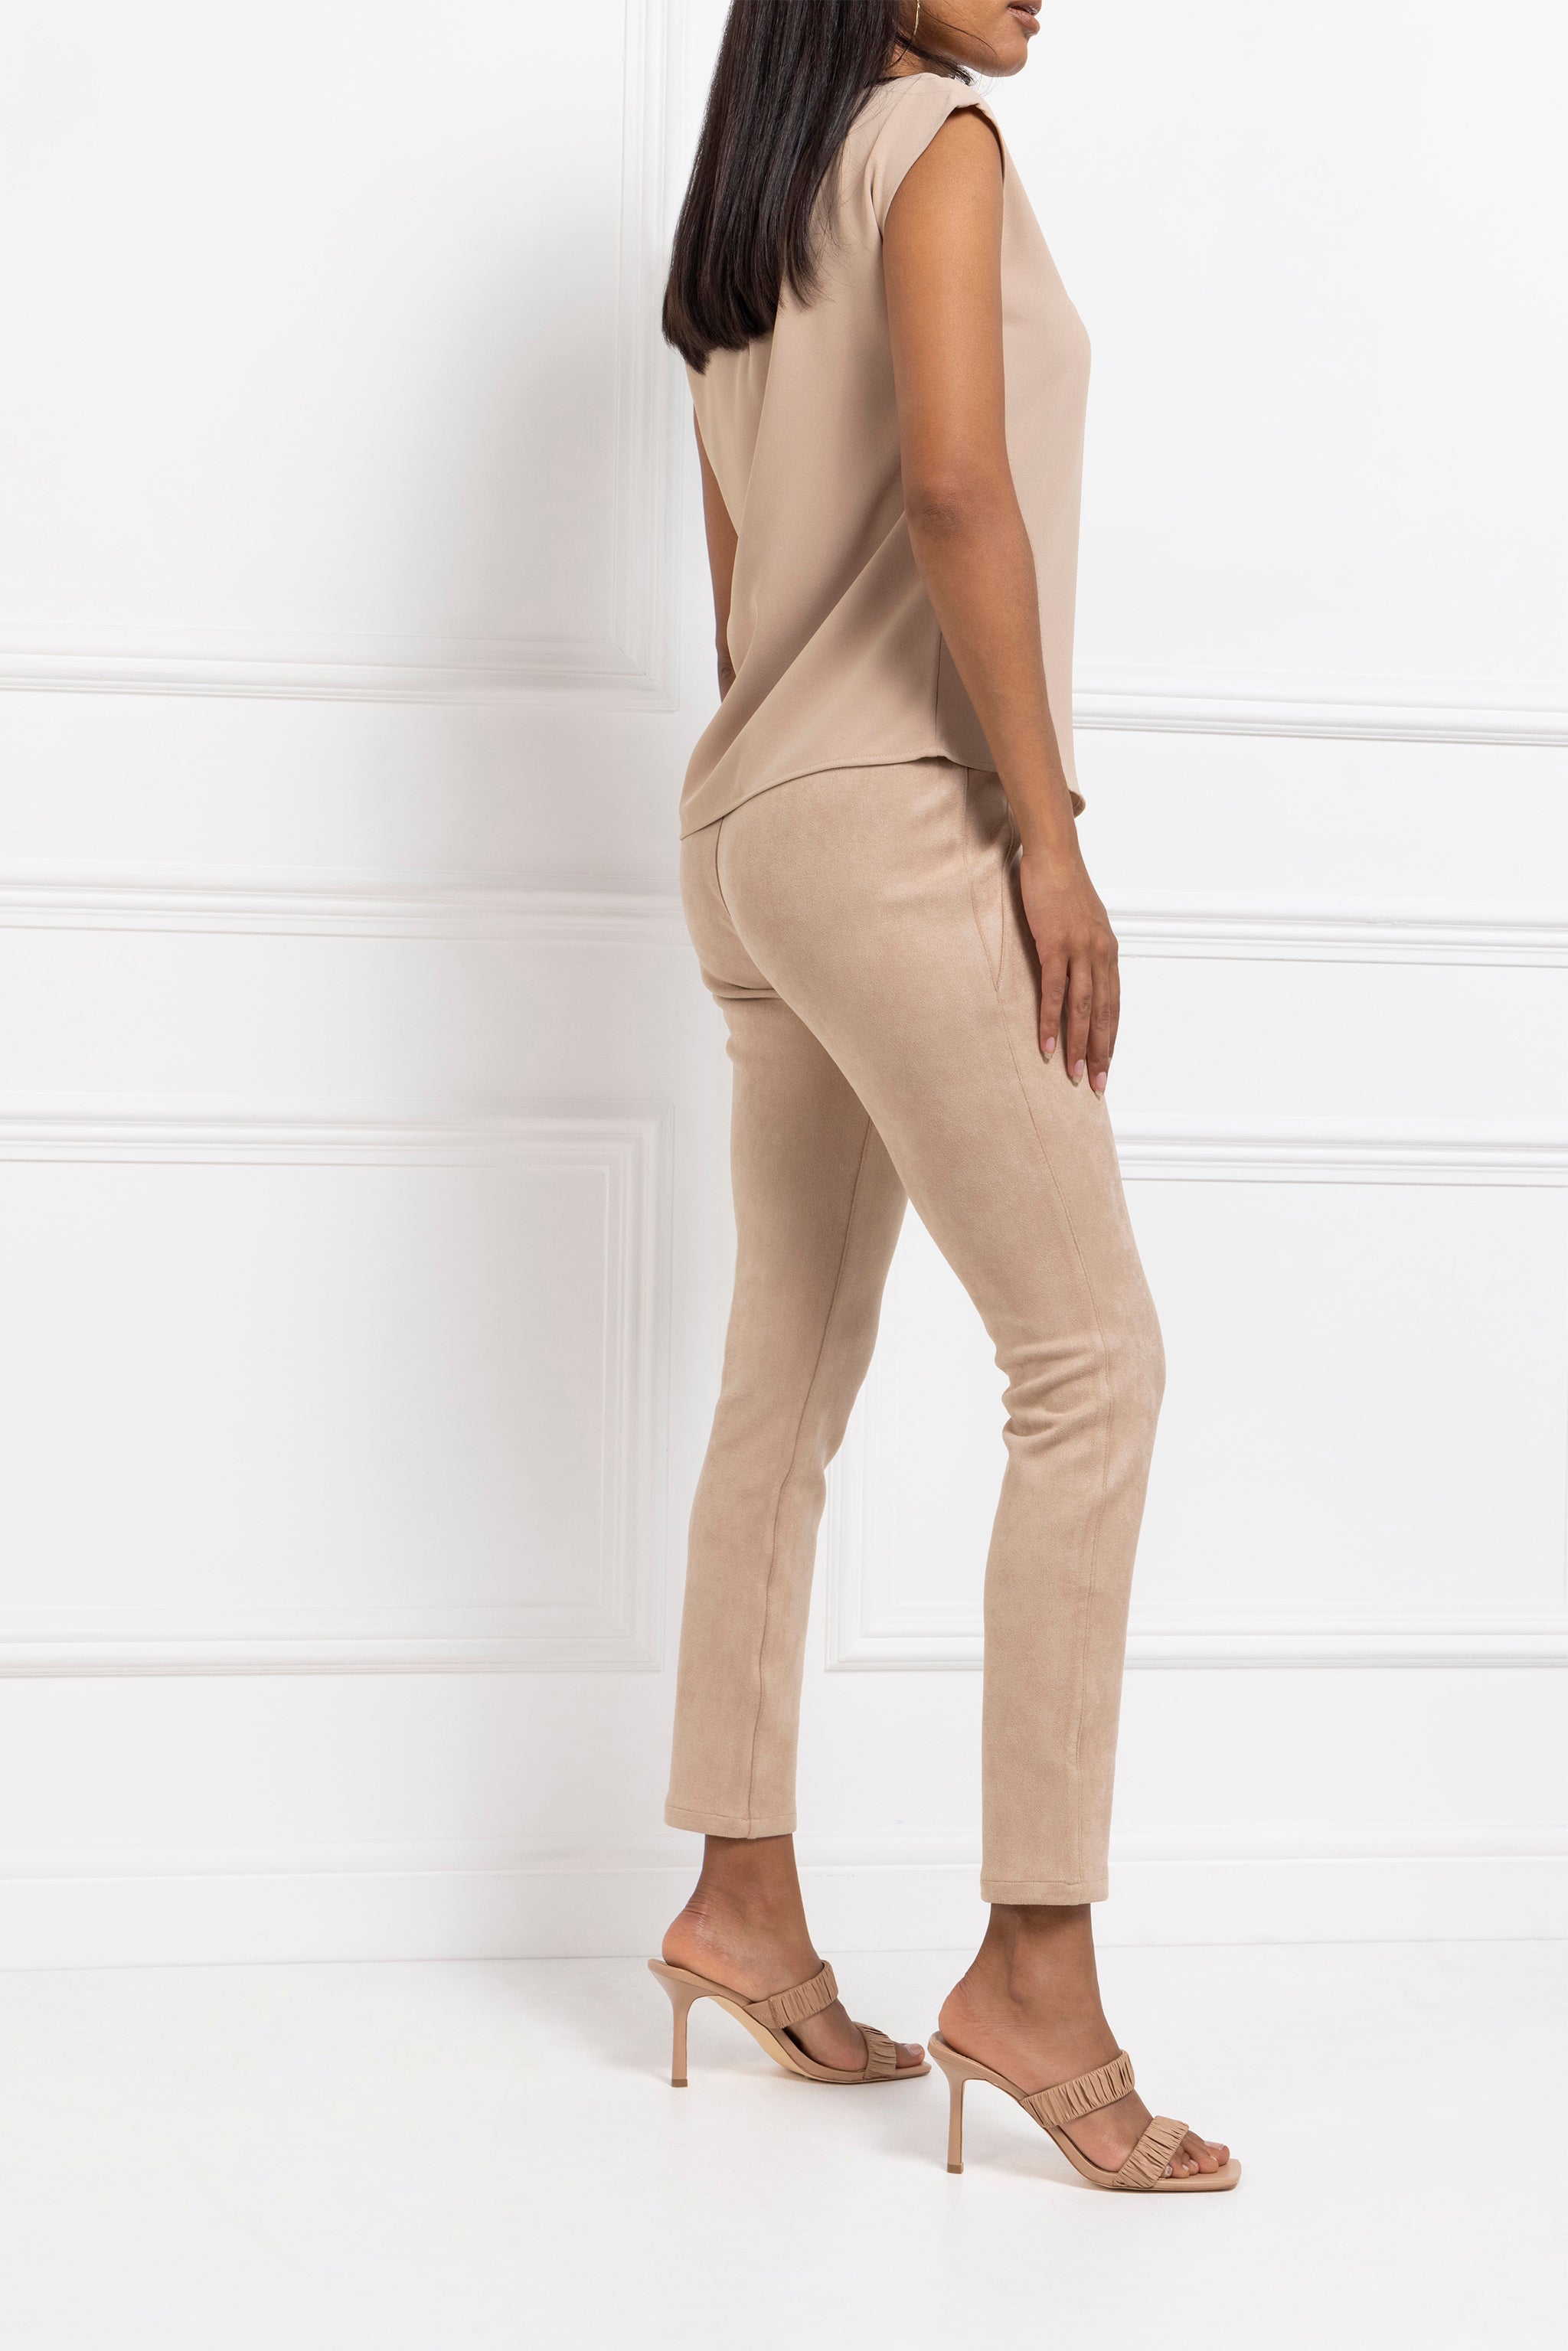 LOFT - One really good reason to fall for our perfect faux suede leggings.